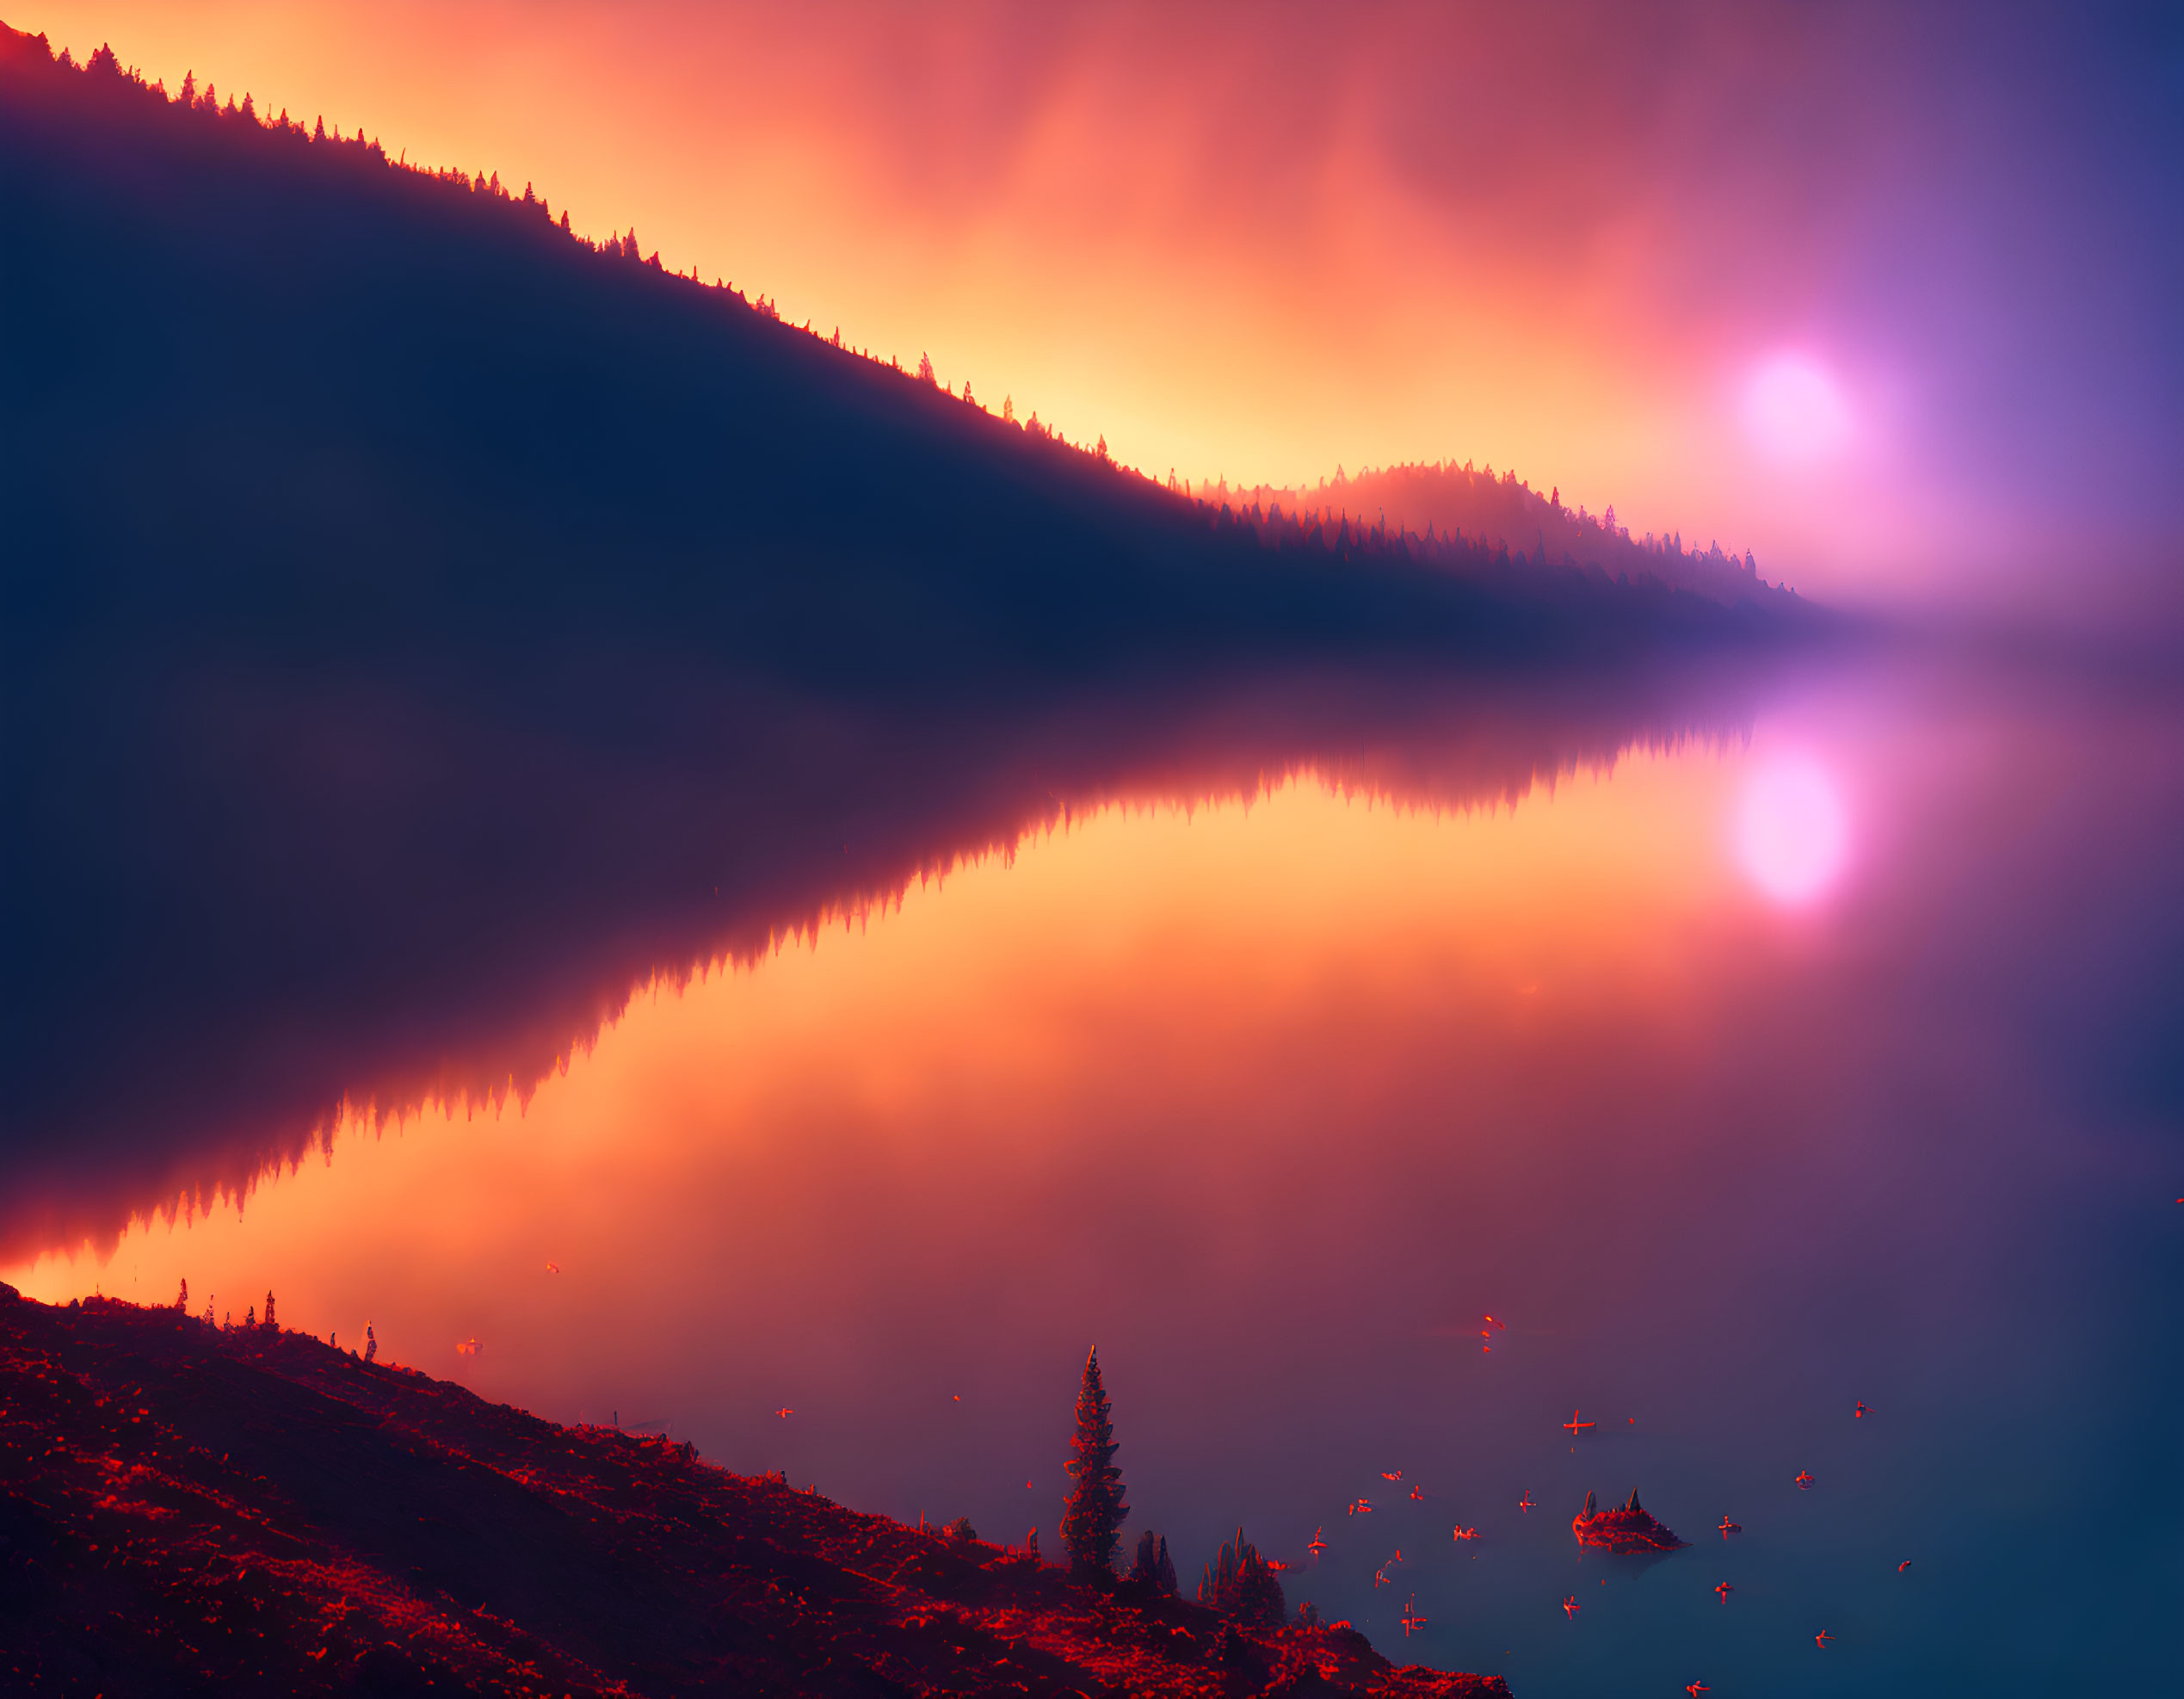 Fiery red and purple sunset over still lake with forested hills